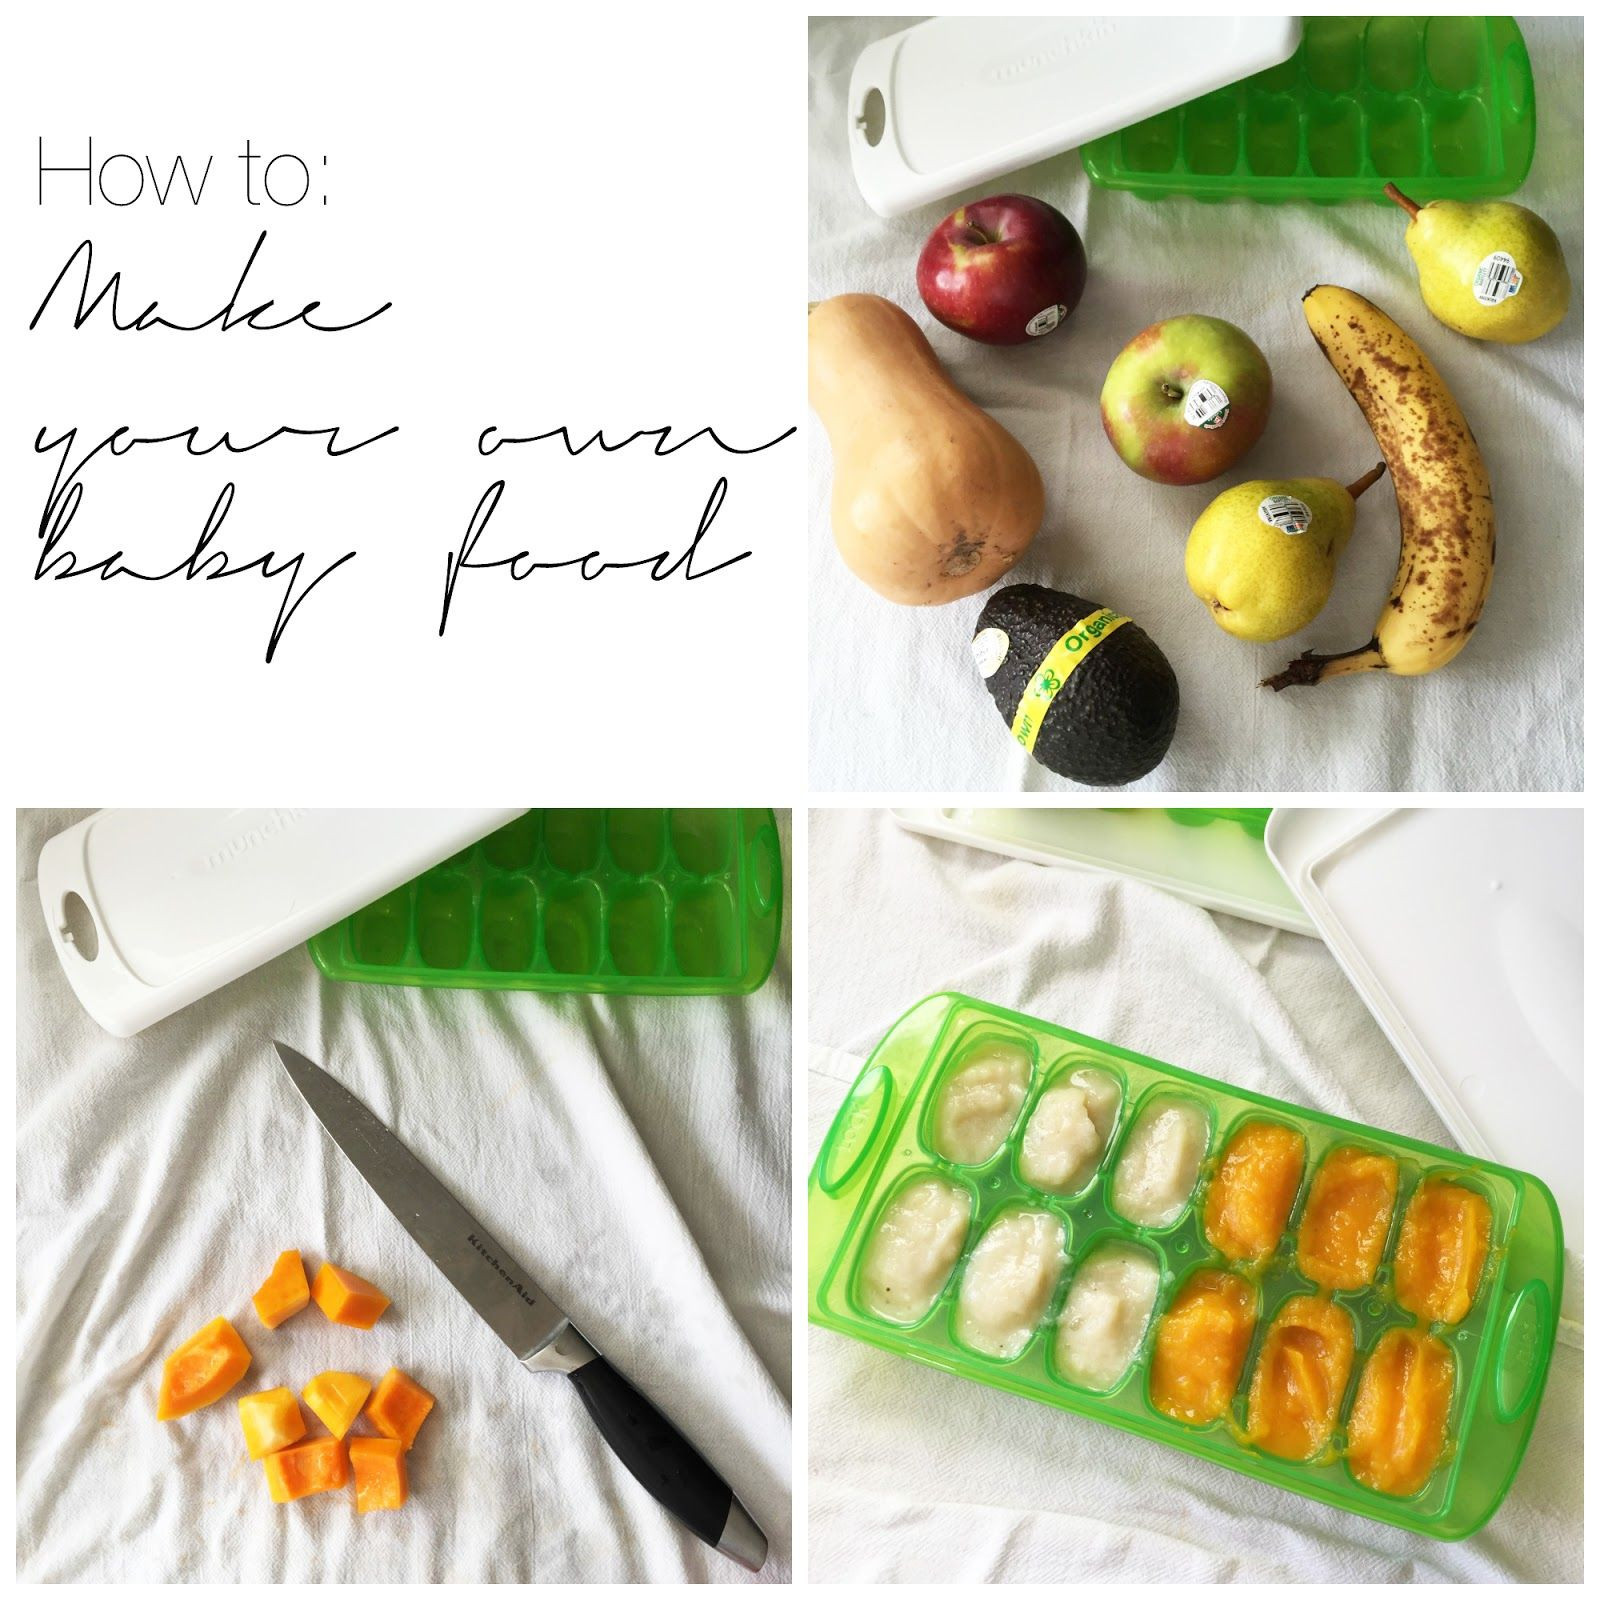 Make Your Own Baby Food Recipes
 Mamahood How to Make your Own Baby Food Easy guide to